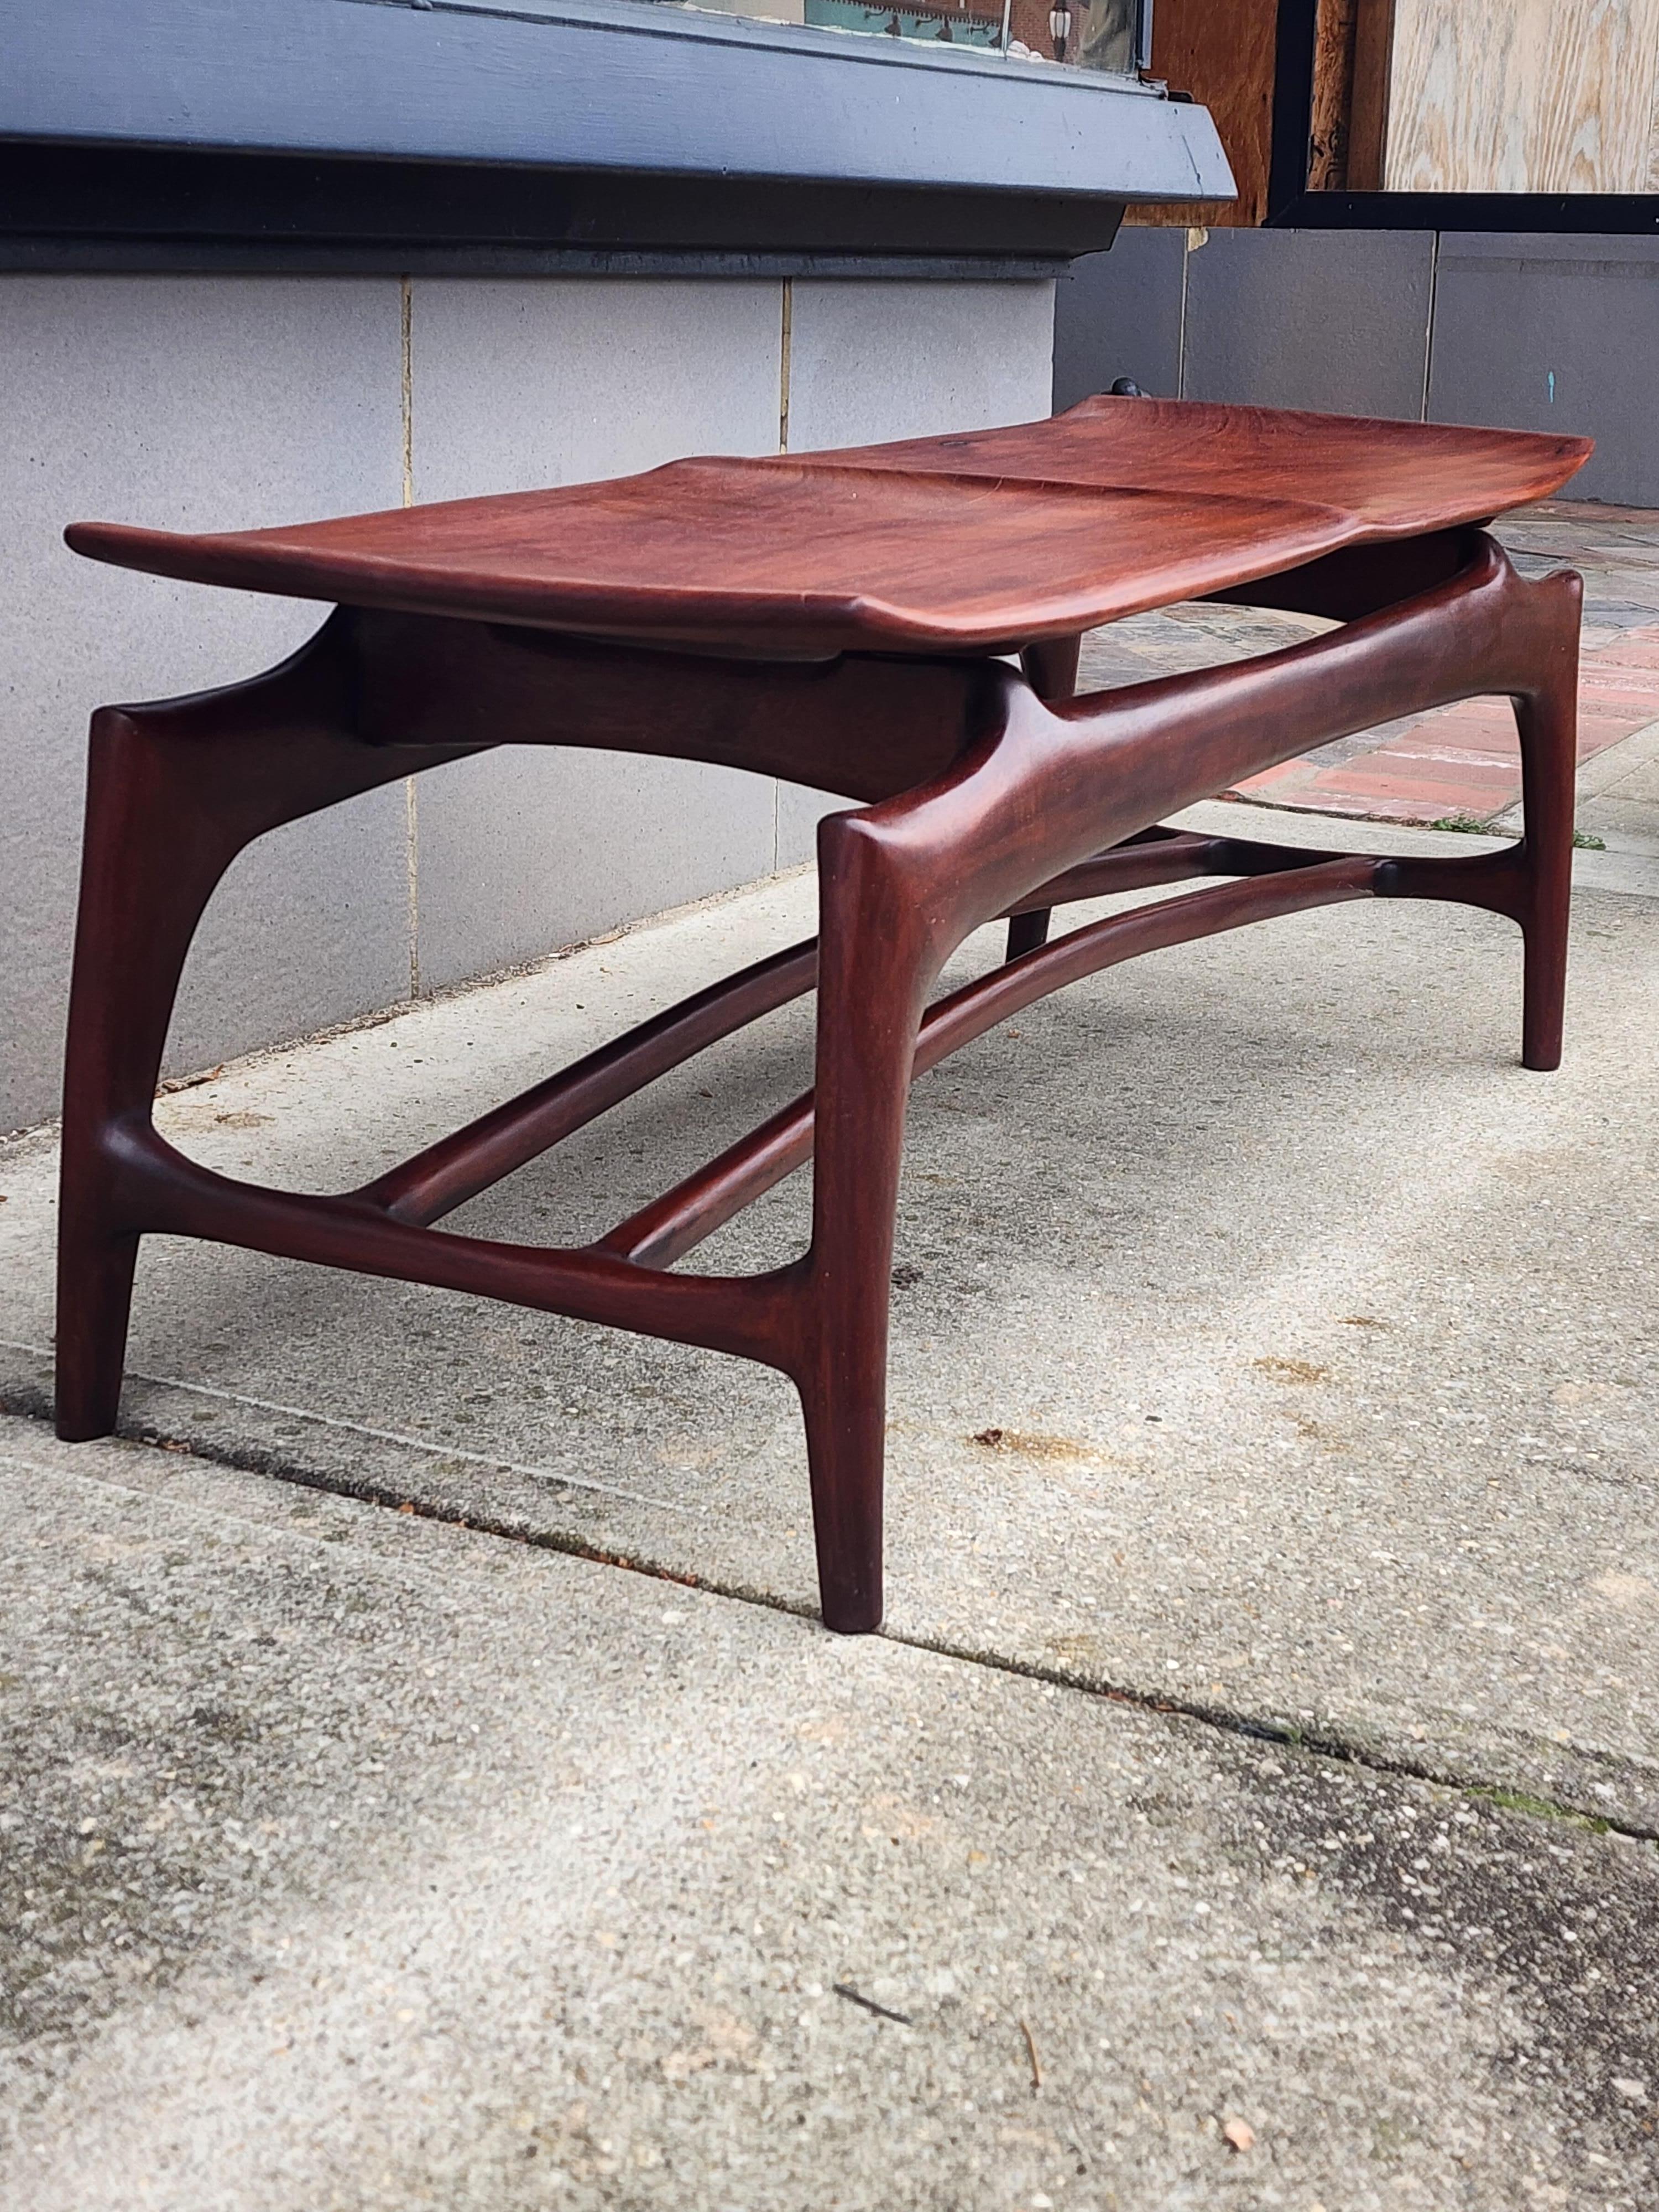 Stunning artisan solid rosewood bench/coffee table that is simply gorgeous.    The curves and attention to detail are top notch, I'm guessing this was made in the early to mid 1990s.  All studio made with incredible joinery and construction.   All